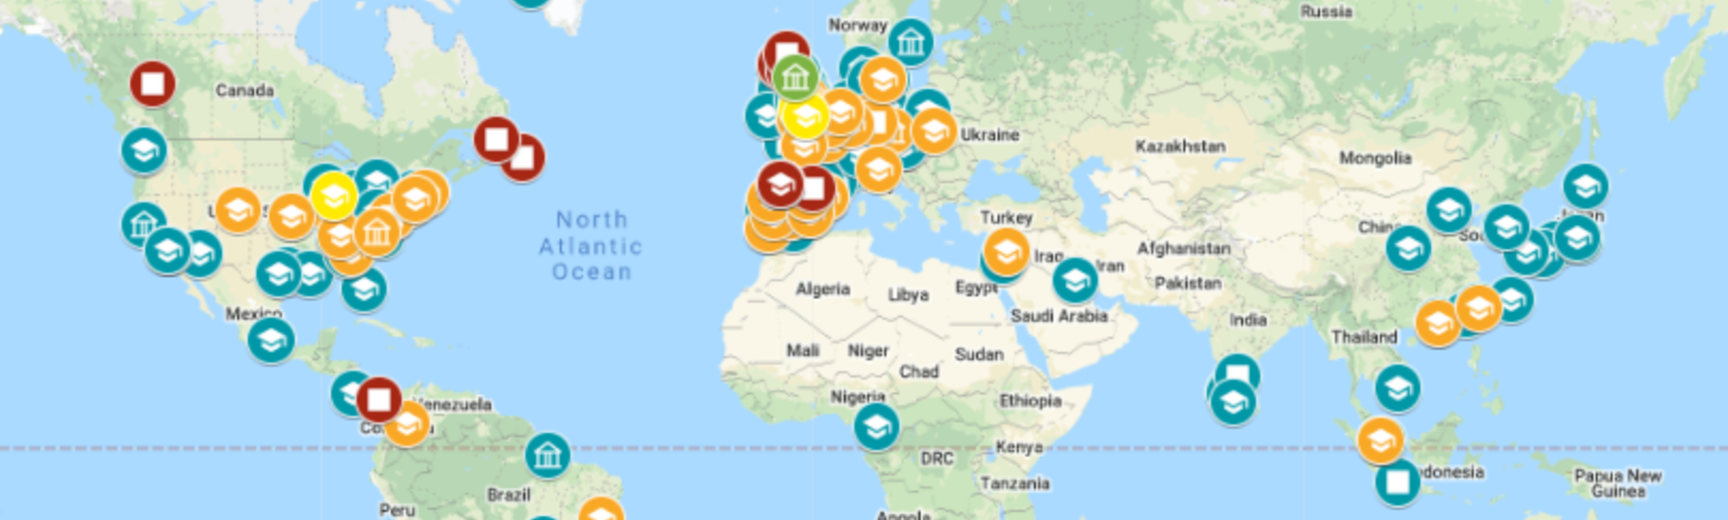 Global map of the museum's research connections